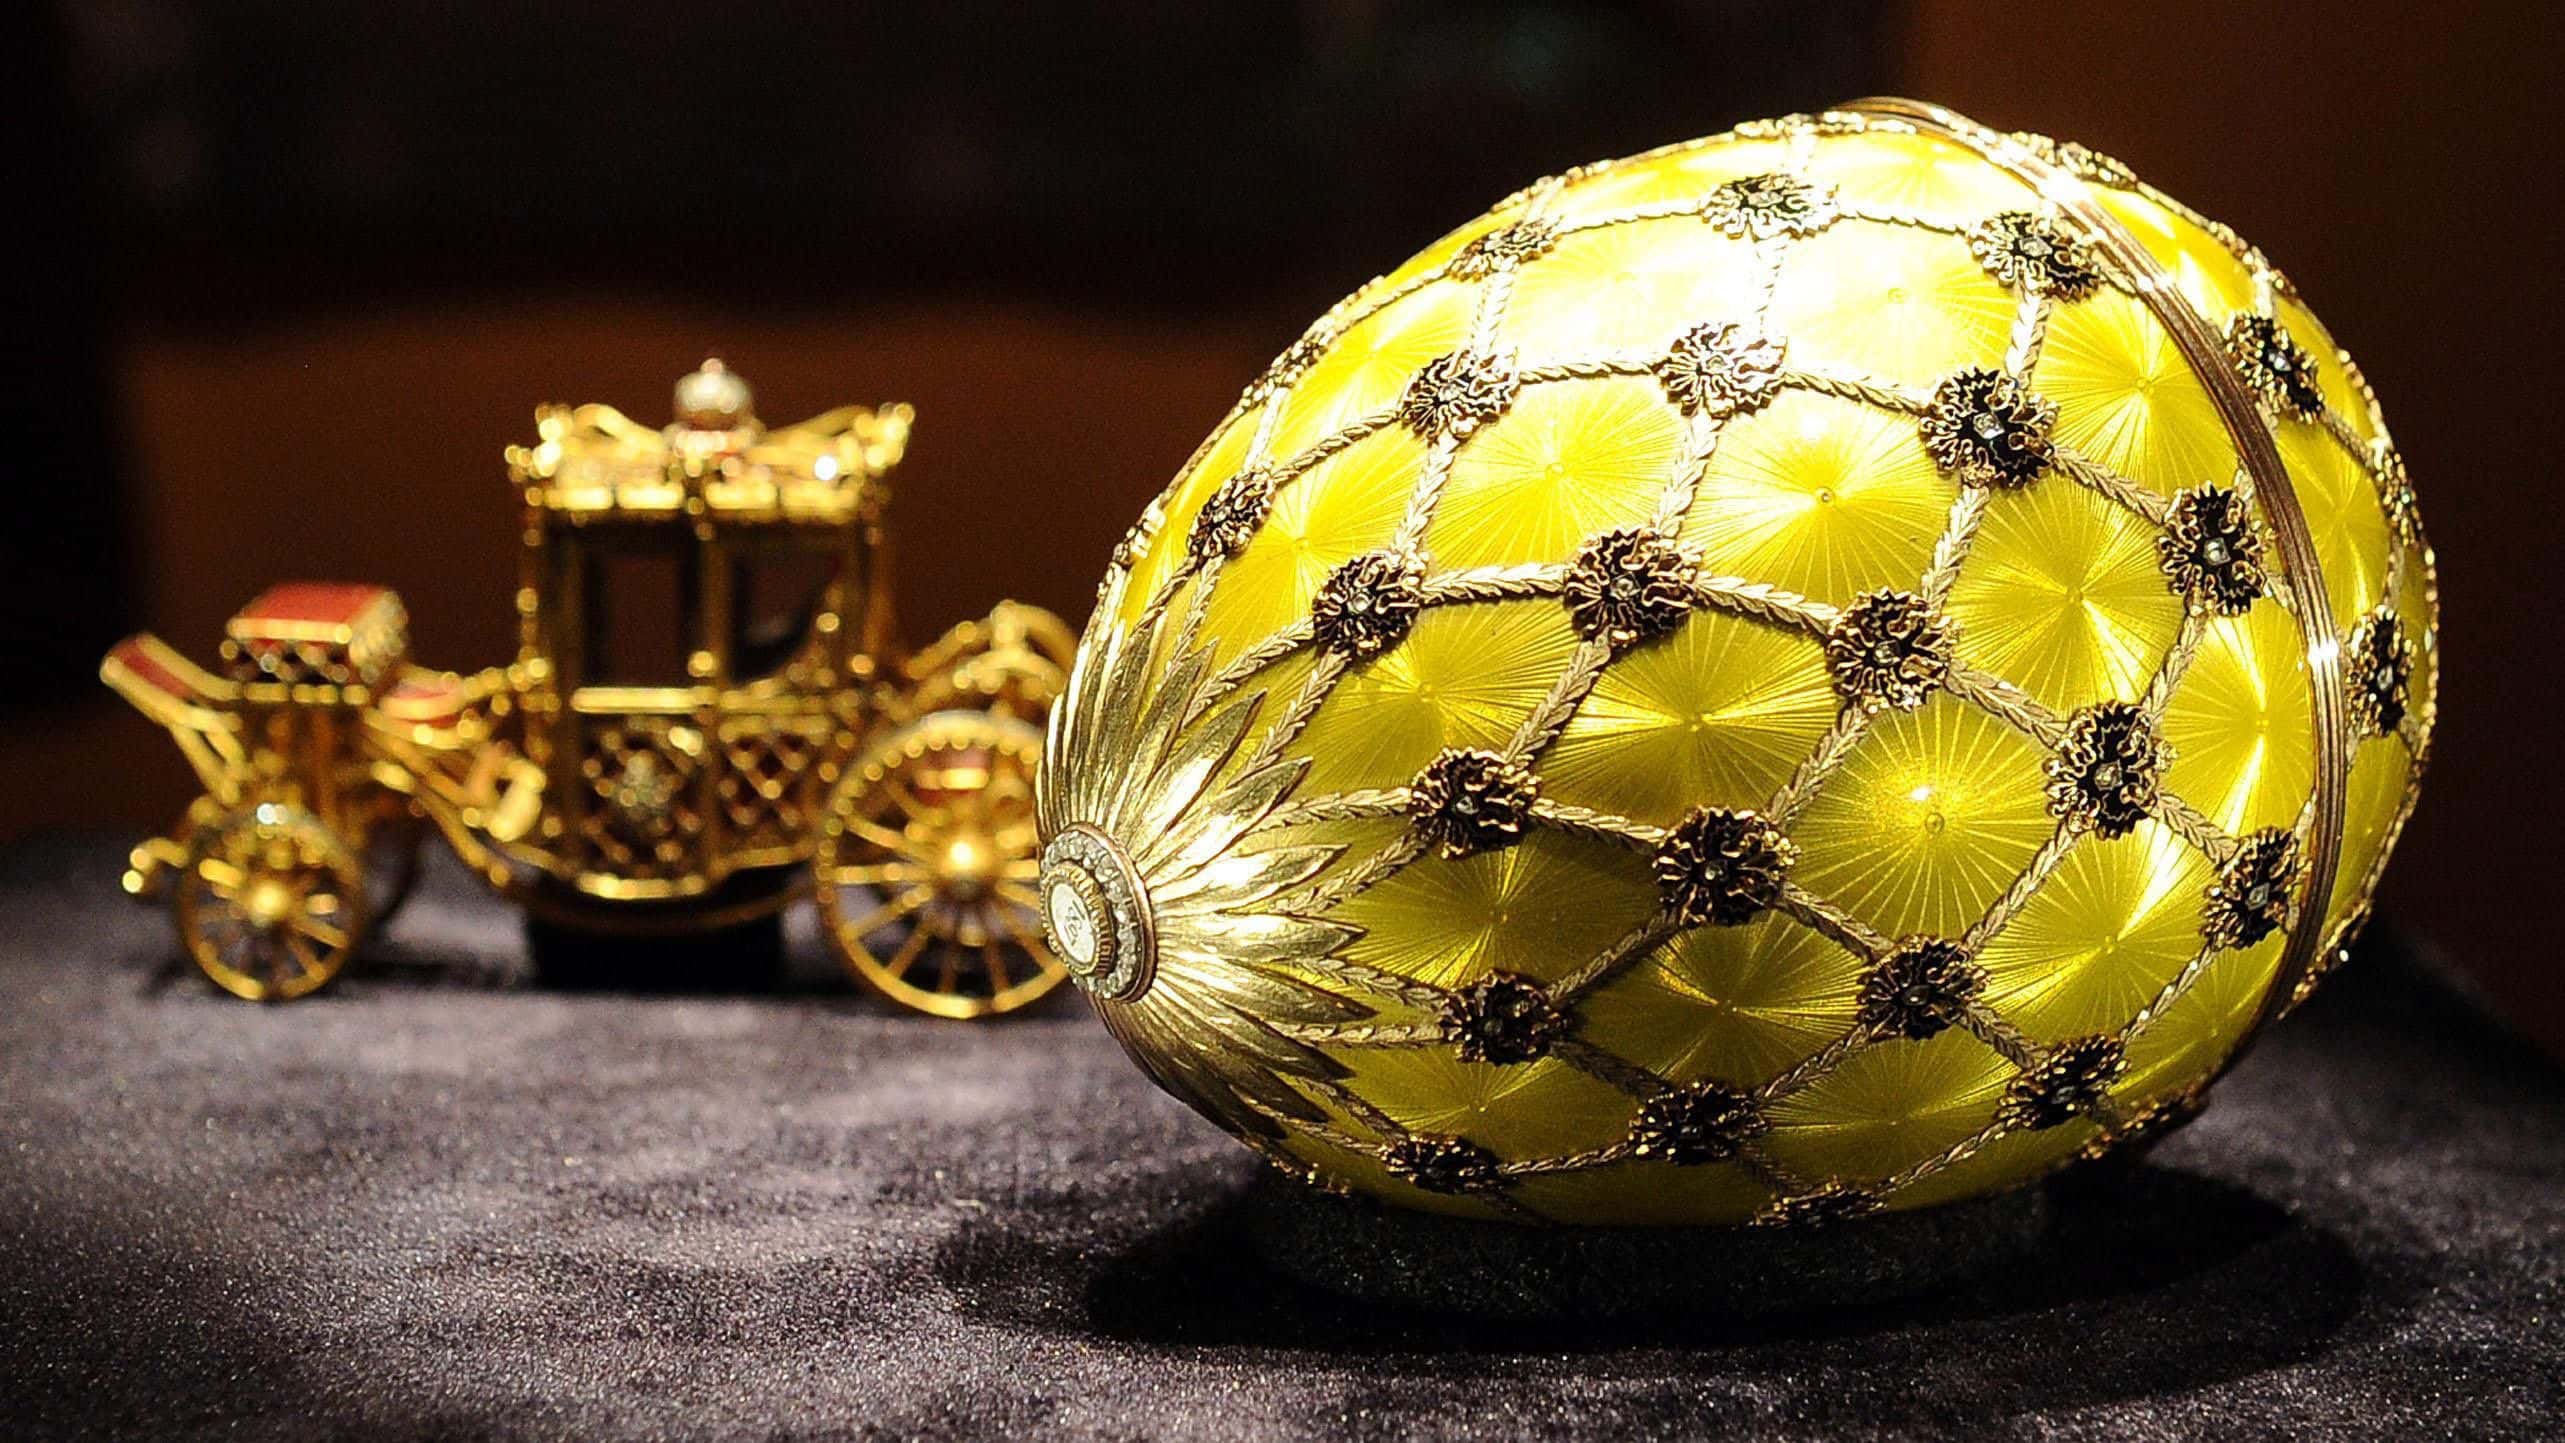 44 Luxurious Facts About The Toys Of The Rich And Famous